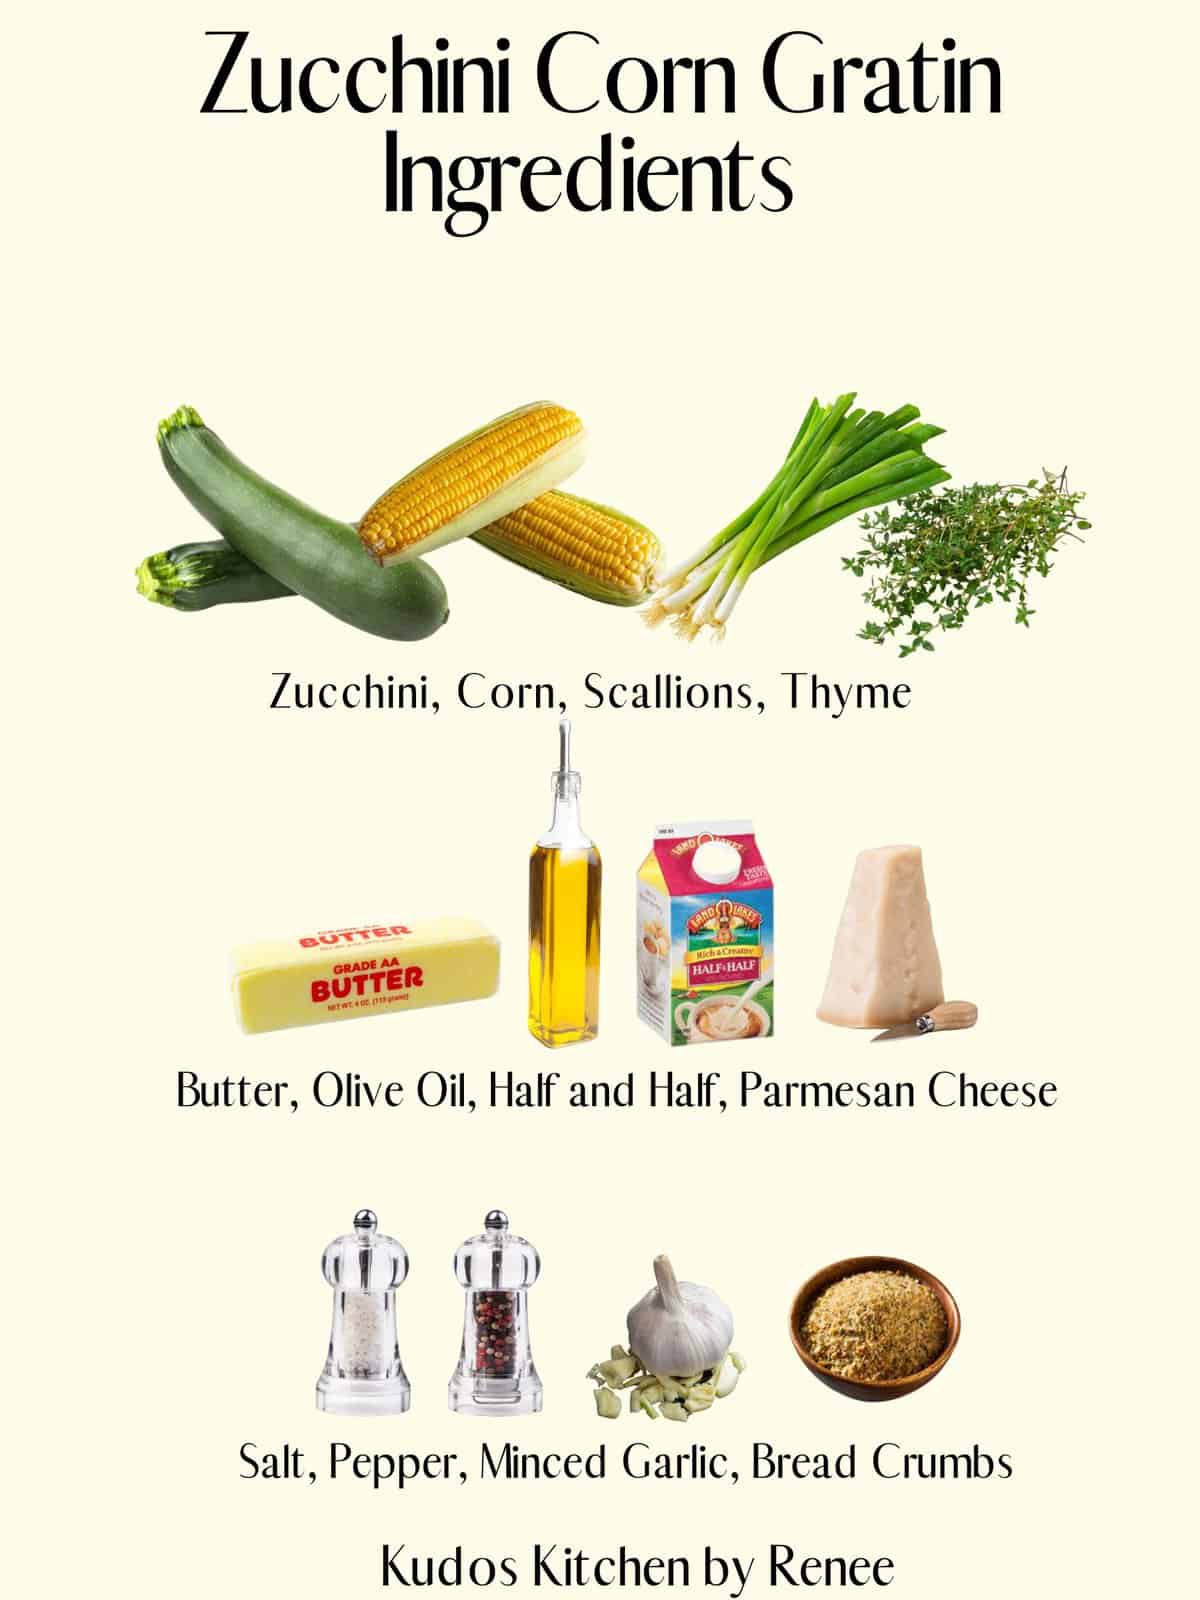 A visual graphic ingredient list for making Zucchini Corn Gratin.